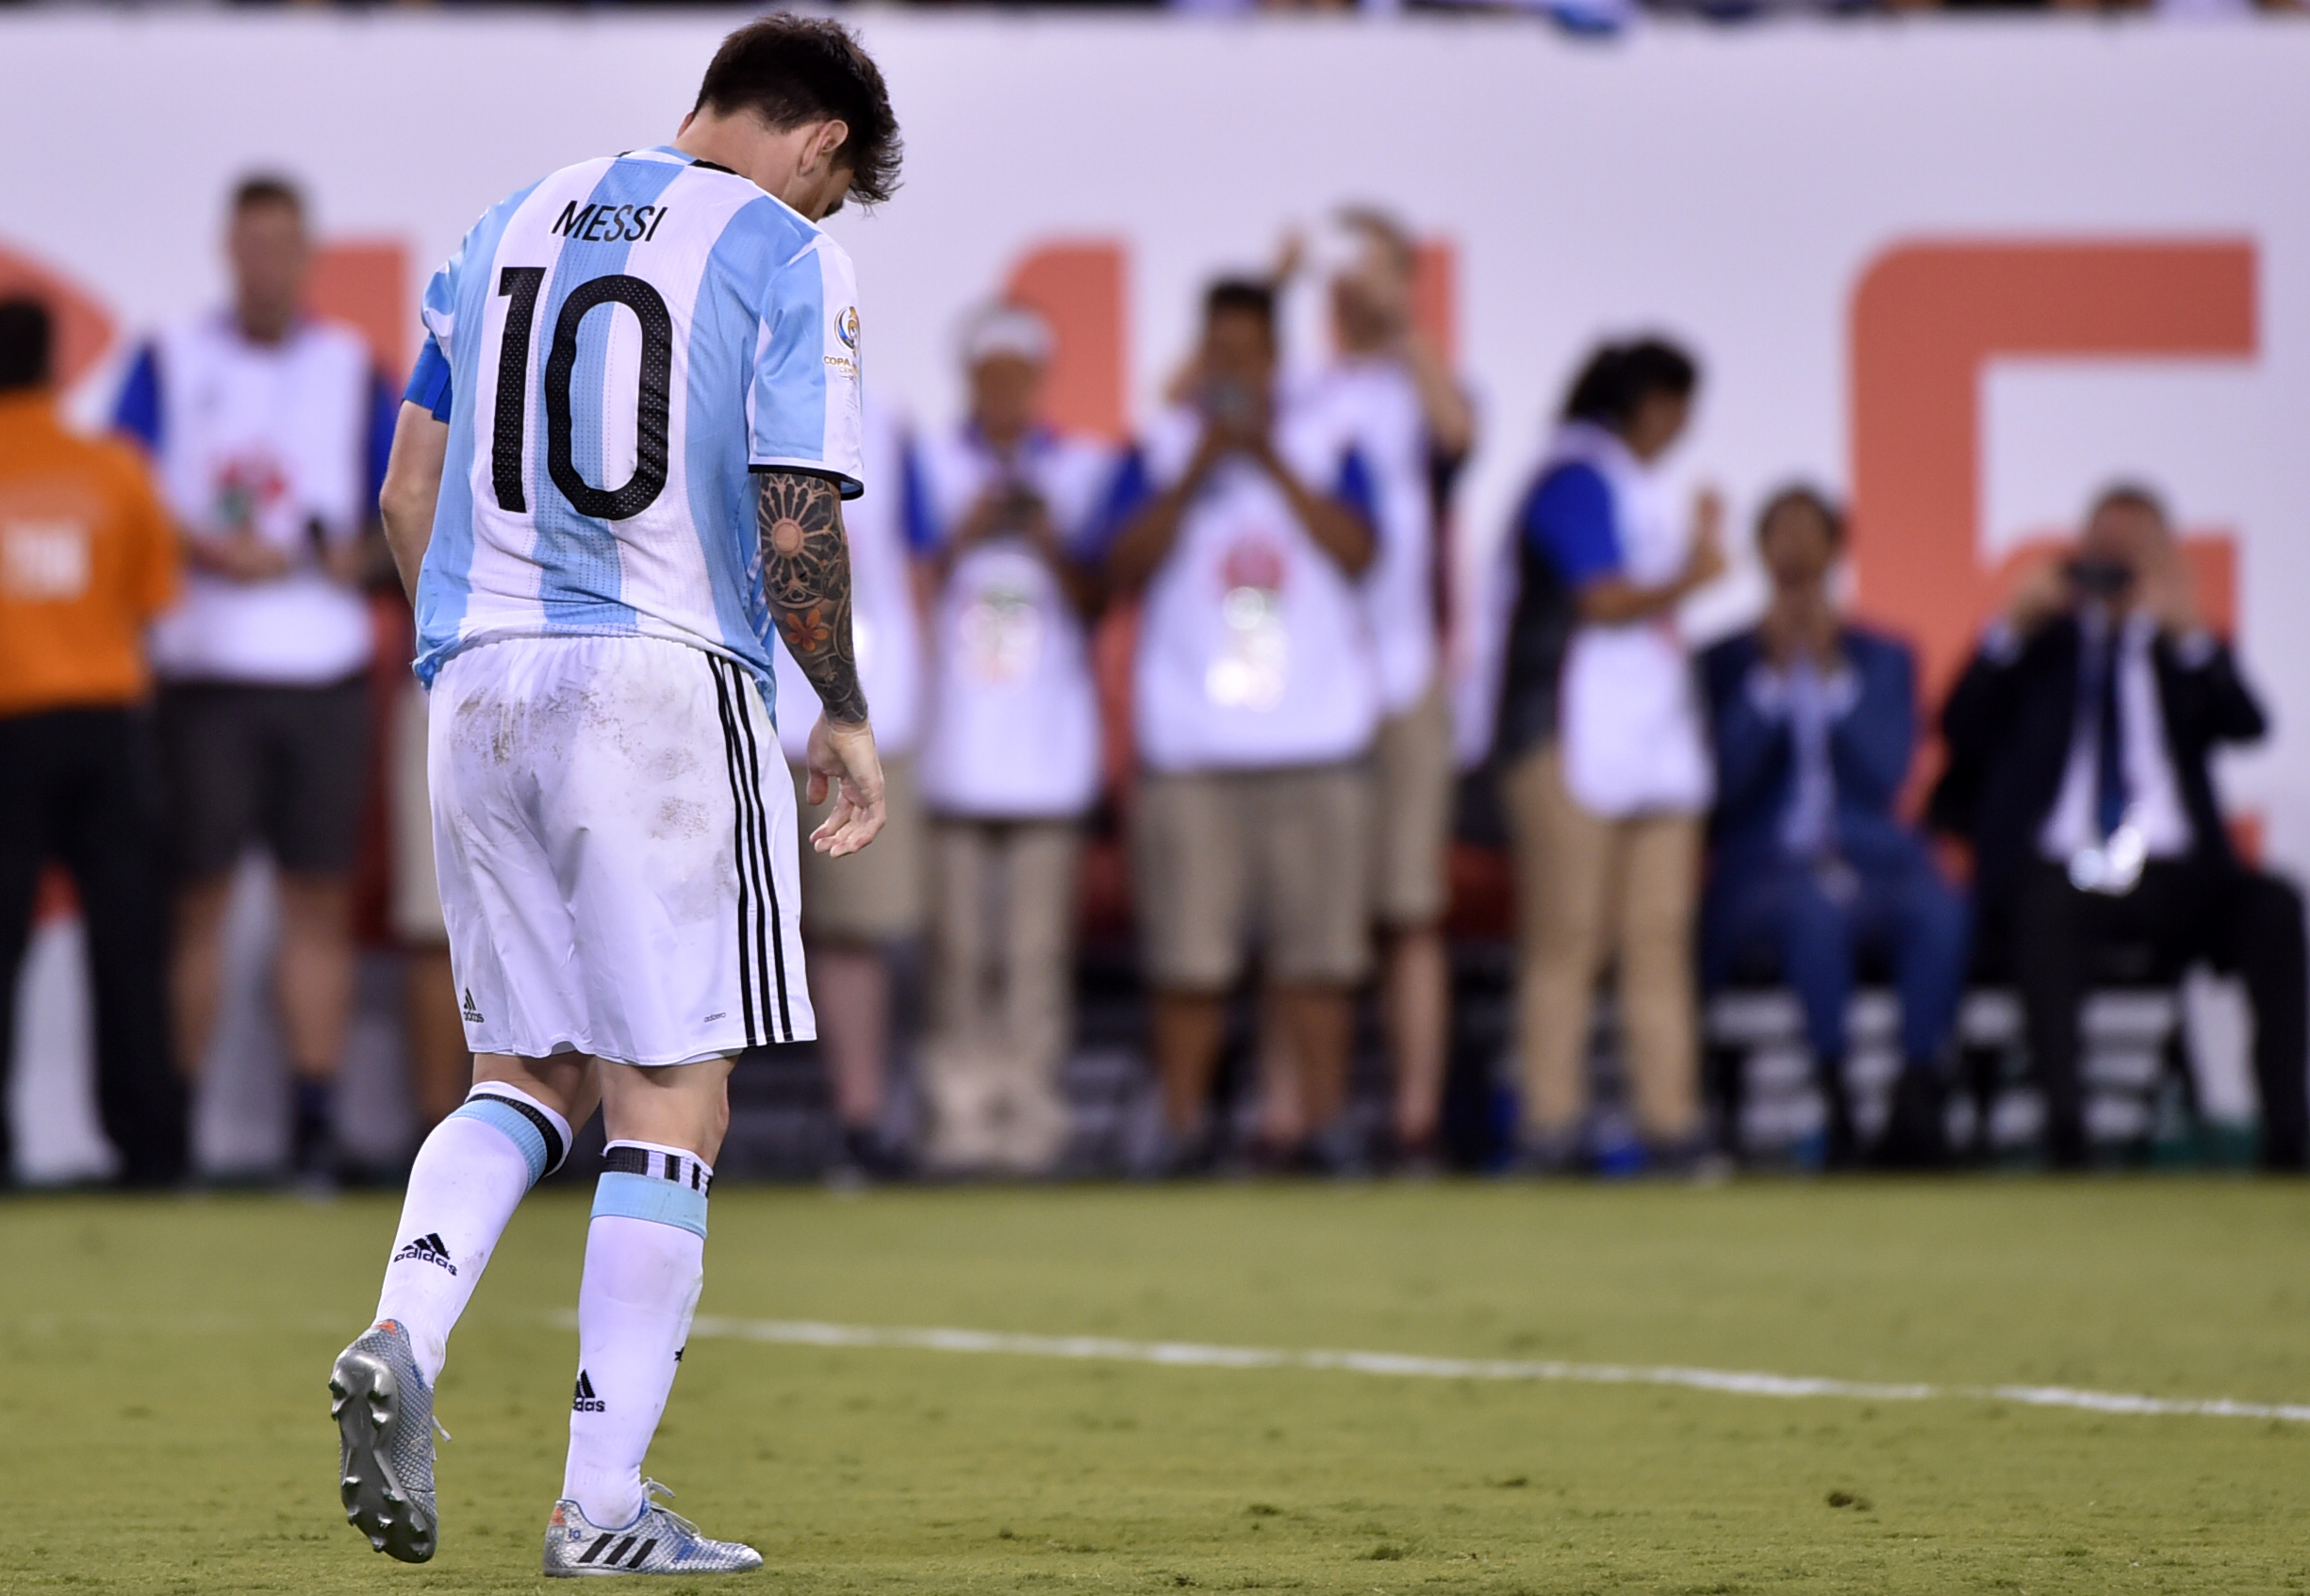 TOPSHOT - Argentina's Lionel Messi shows his dejection after being defeated by Chile in the Copa America Centenario final in East Rutherford, New Jersey, United States, on June 26, 2016.  / AFP / Nelson ALMEIDA        (Photo credit should read NELSON ALMEIDA/AFP/Getty Images)